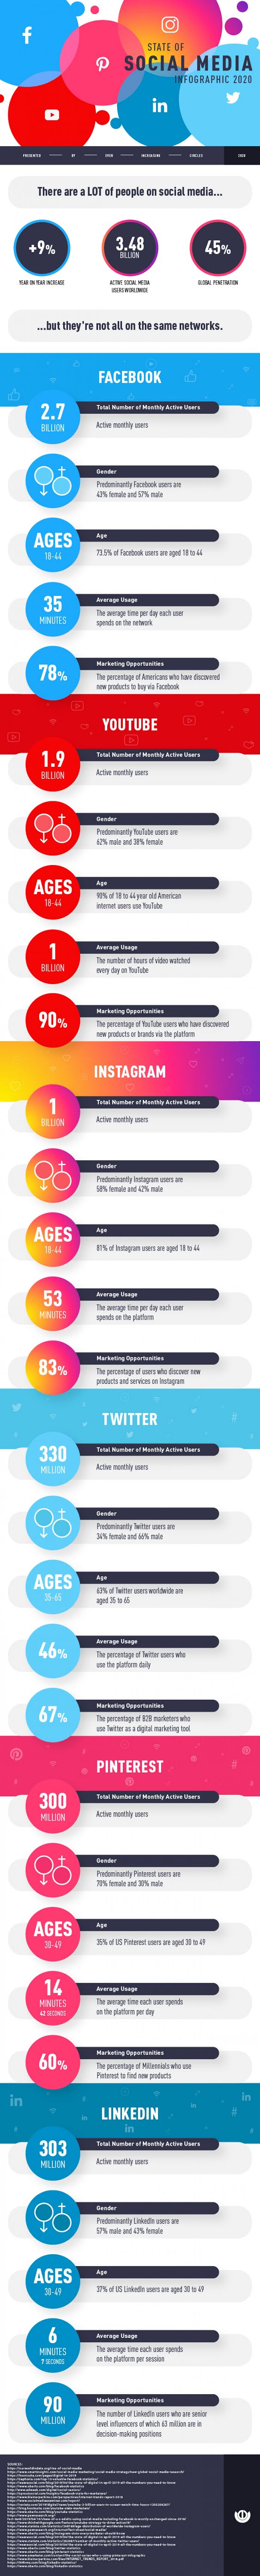 The State Of Social Media 2020 #infographic